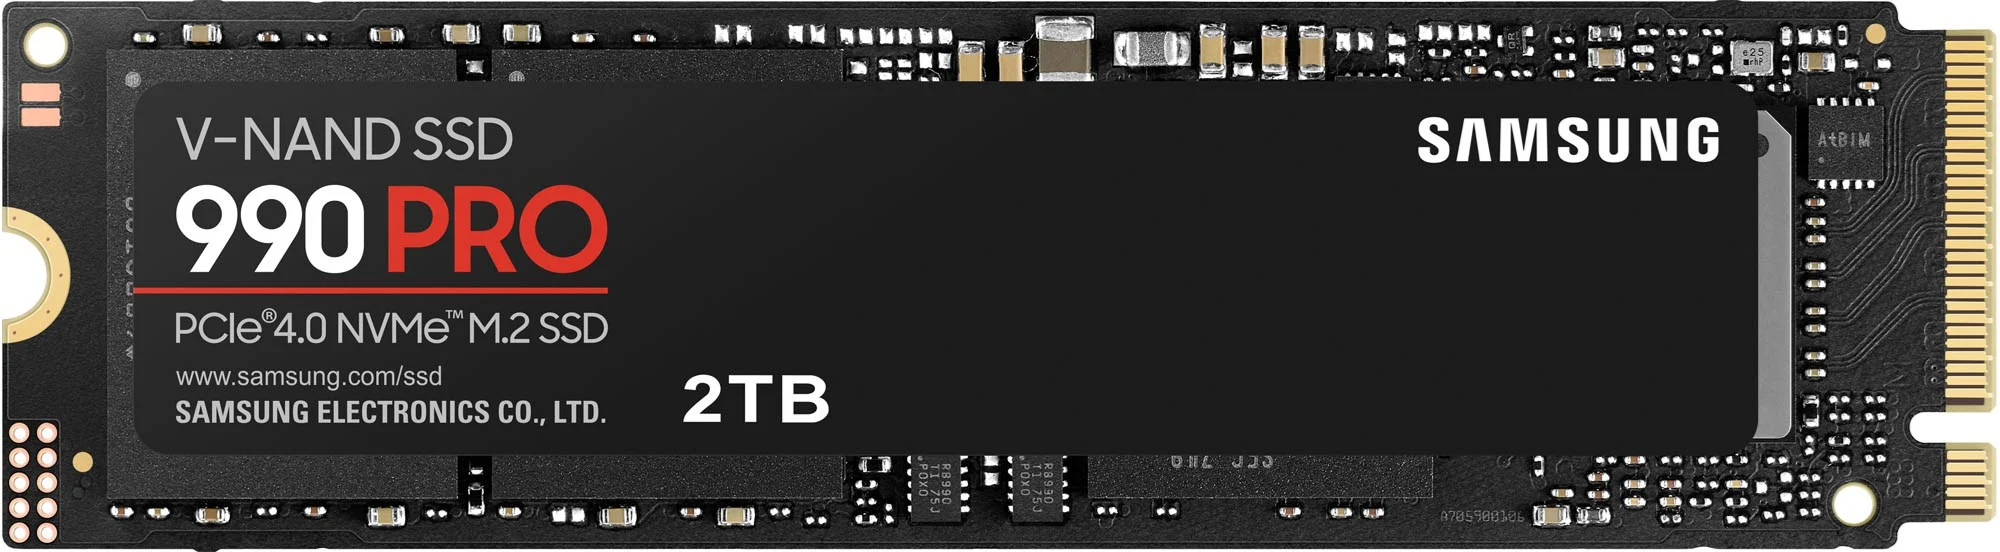 Samsung 990 Pro 2TB SSD - Best SSD for 4K Video Editing